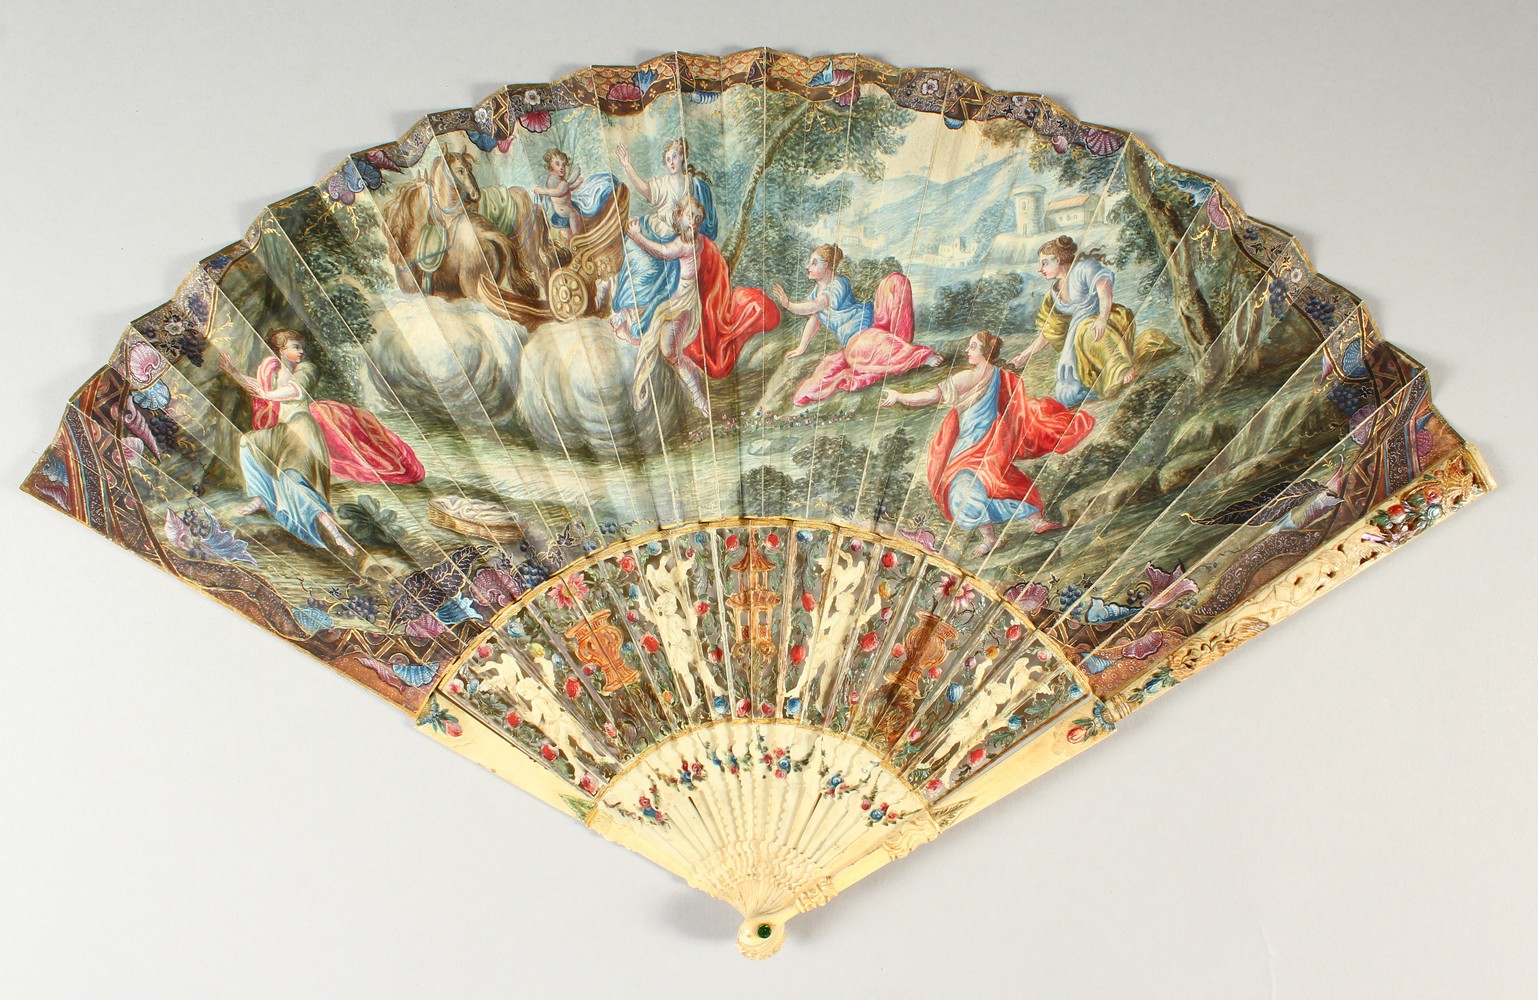 A LOUIS XVTH CARVED AND PAINTED IVORY FAN painted with classical scenes. Provenance: J. DUVELLEROY